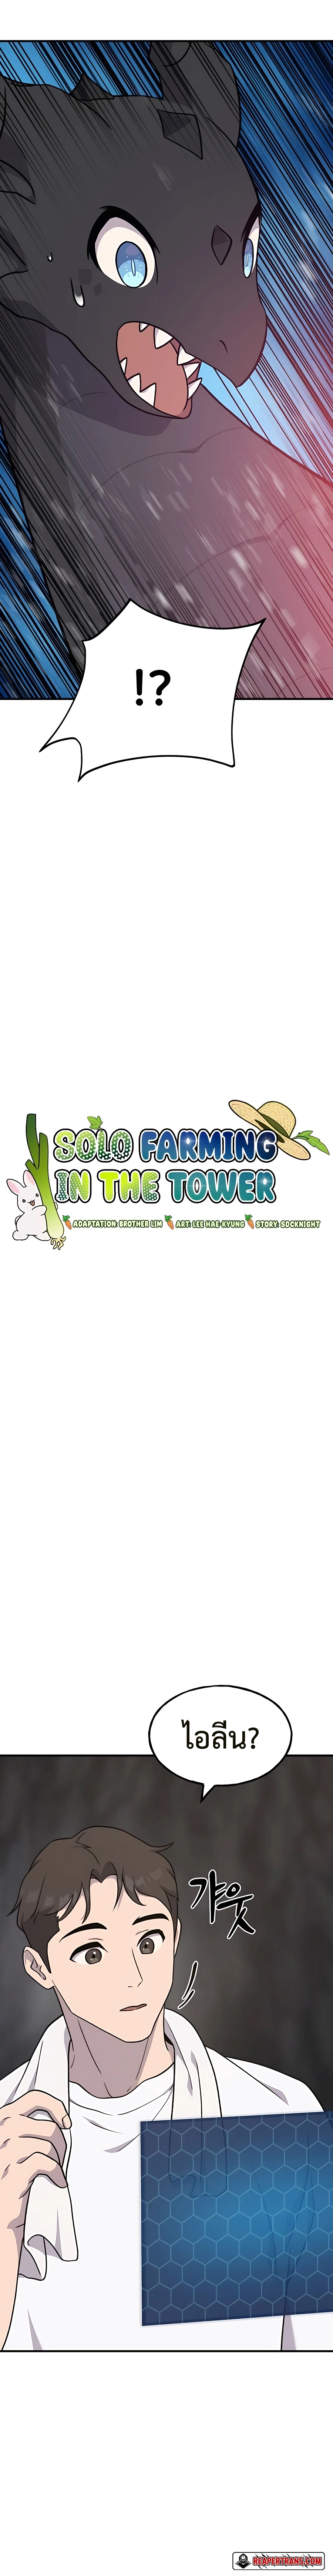 Solo Farming In The Tower 45 (2)